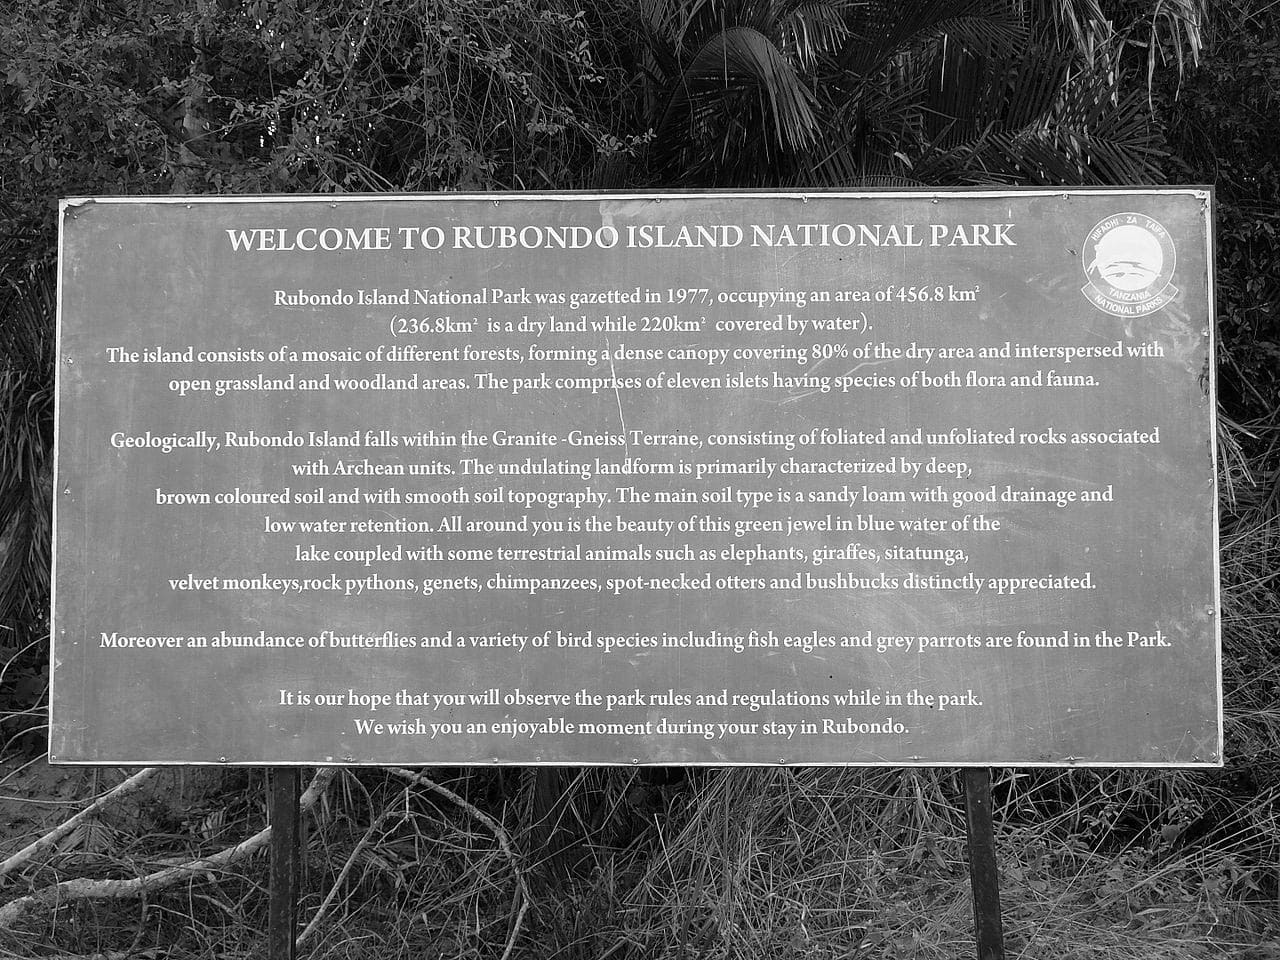 The sign welcoming visitors to Rubondo Island National Park